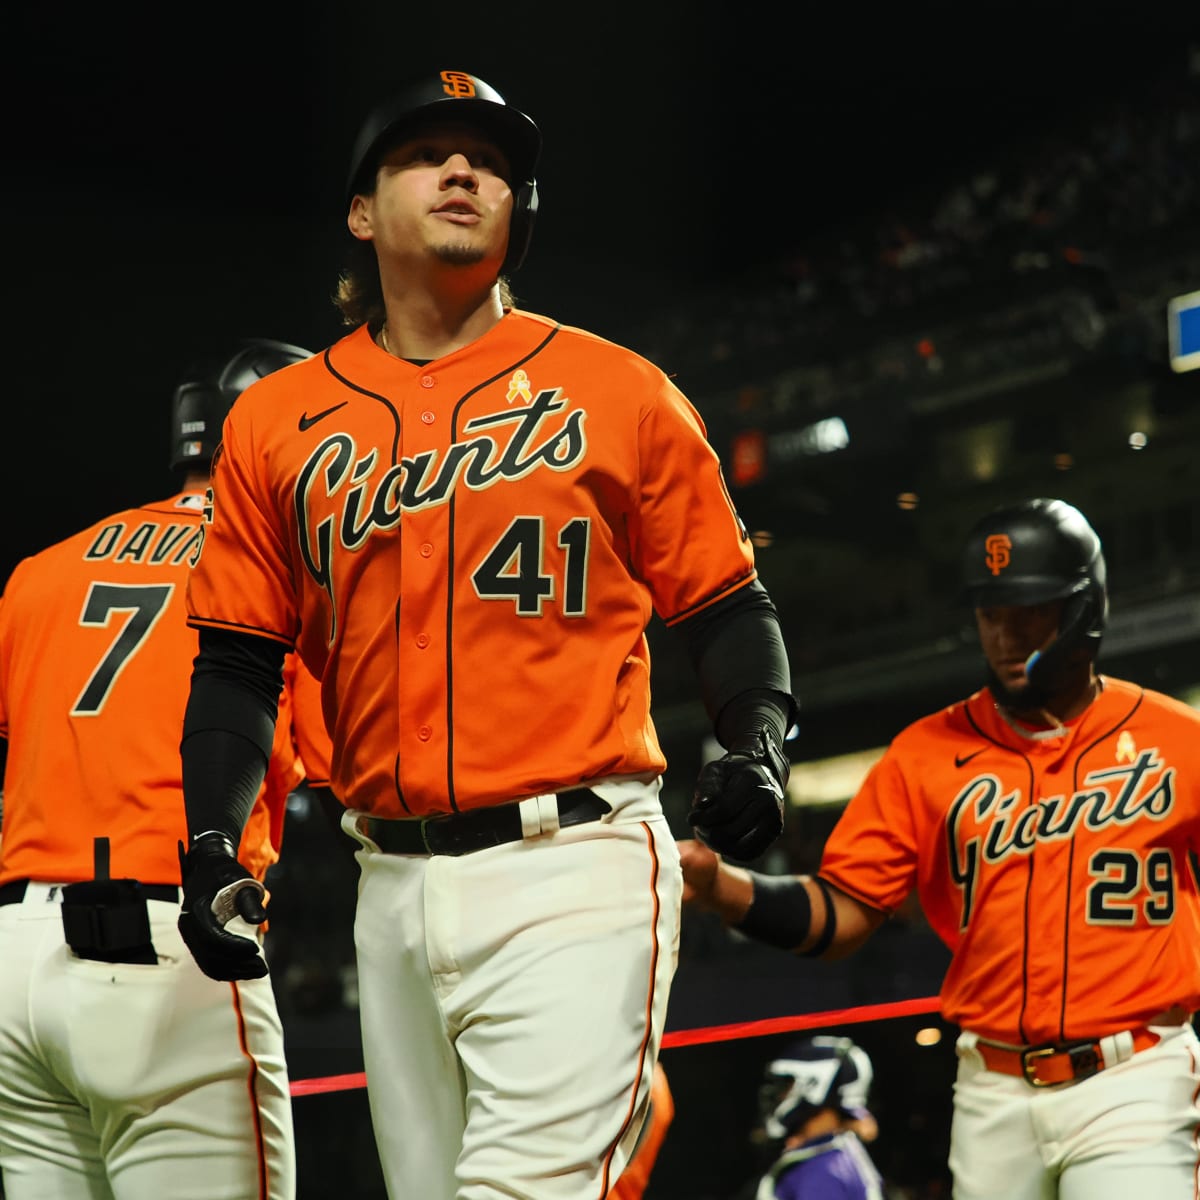 SF Giants' Wilmer Flores homers, exits game vs. Astros